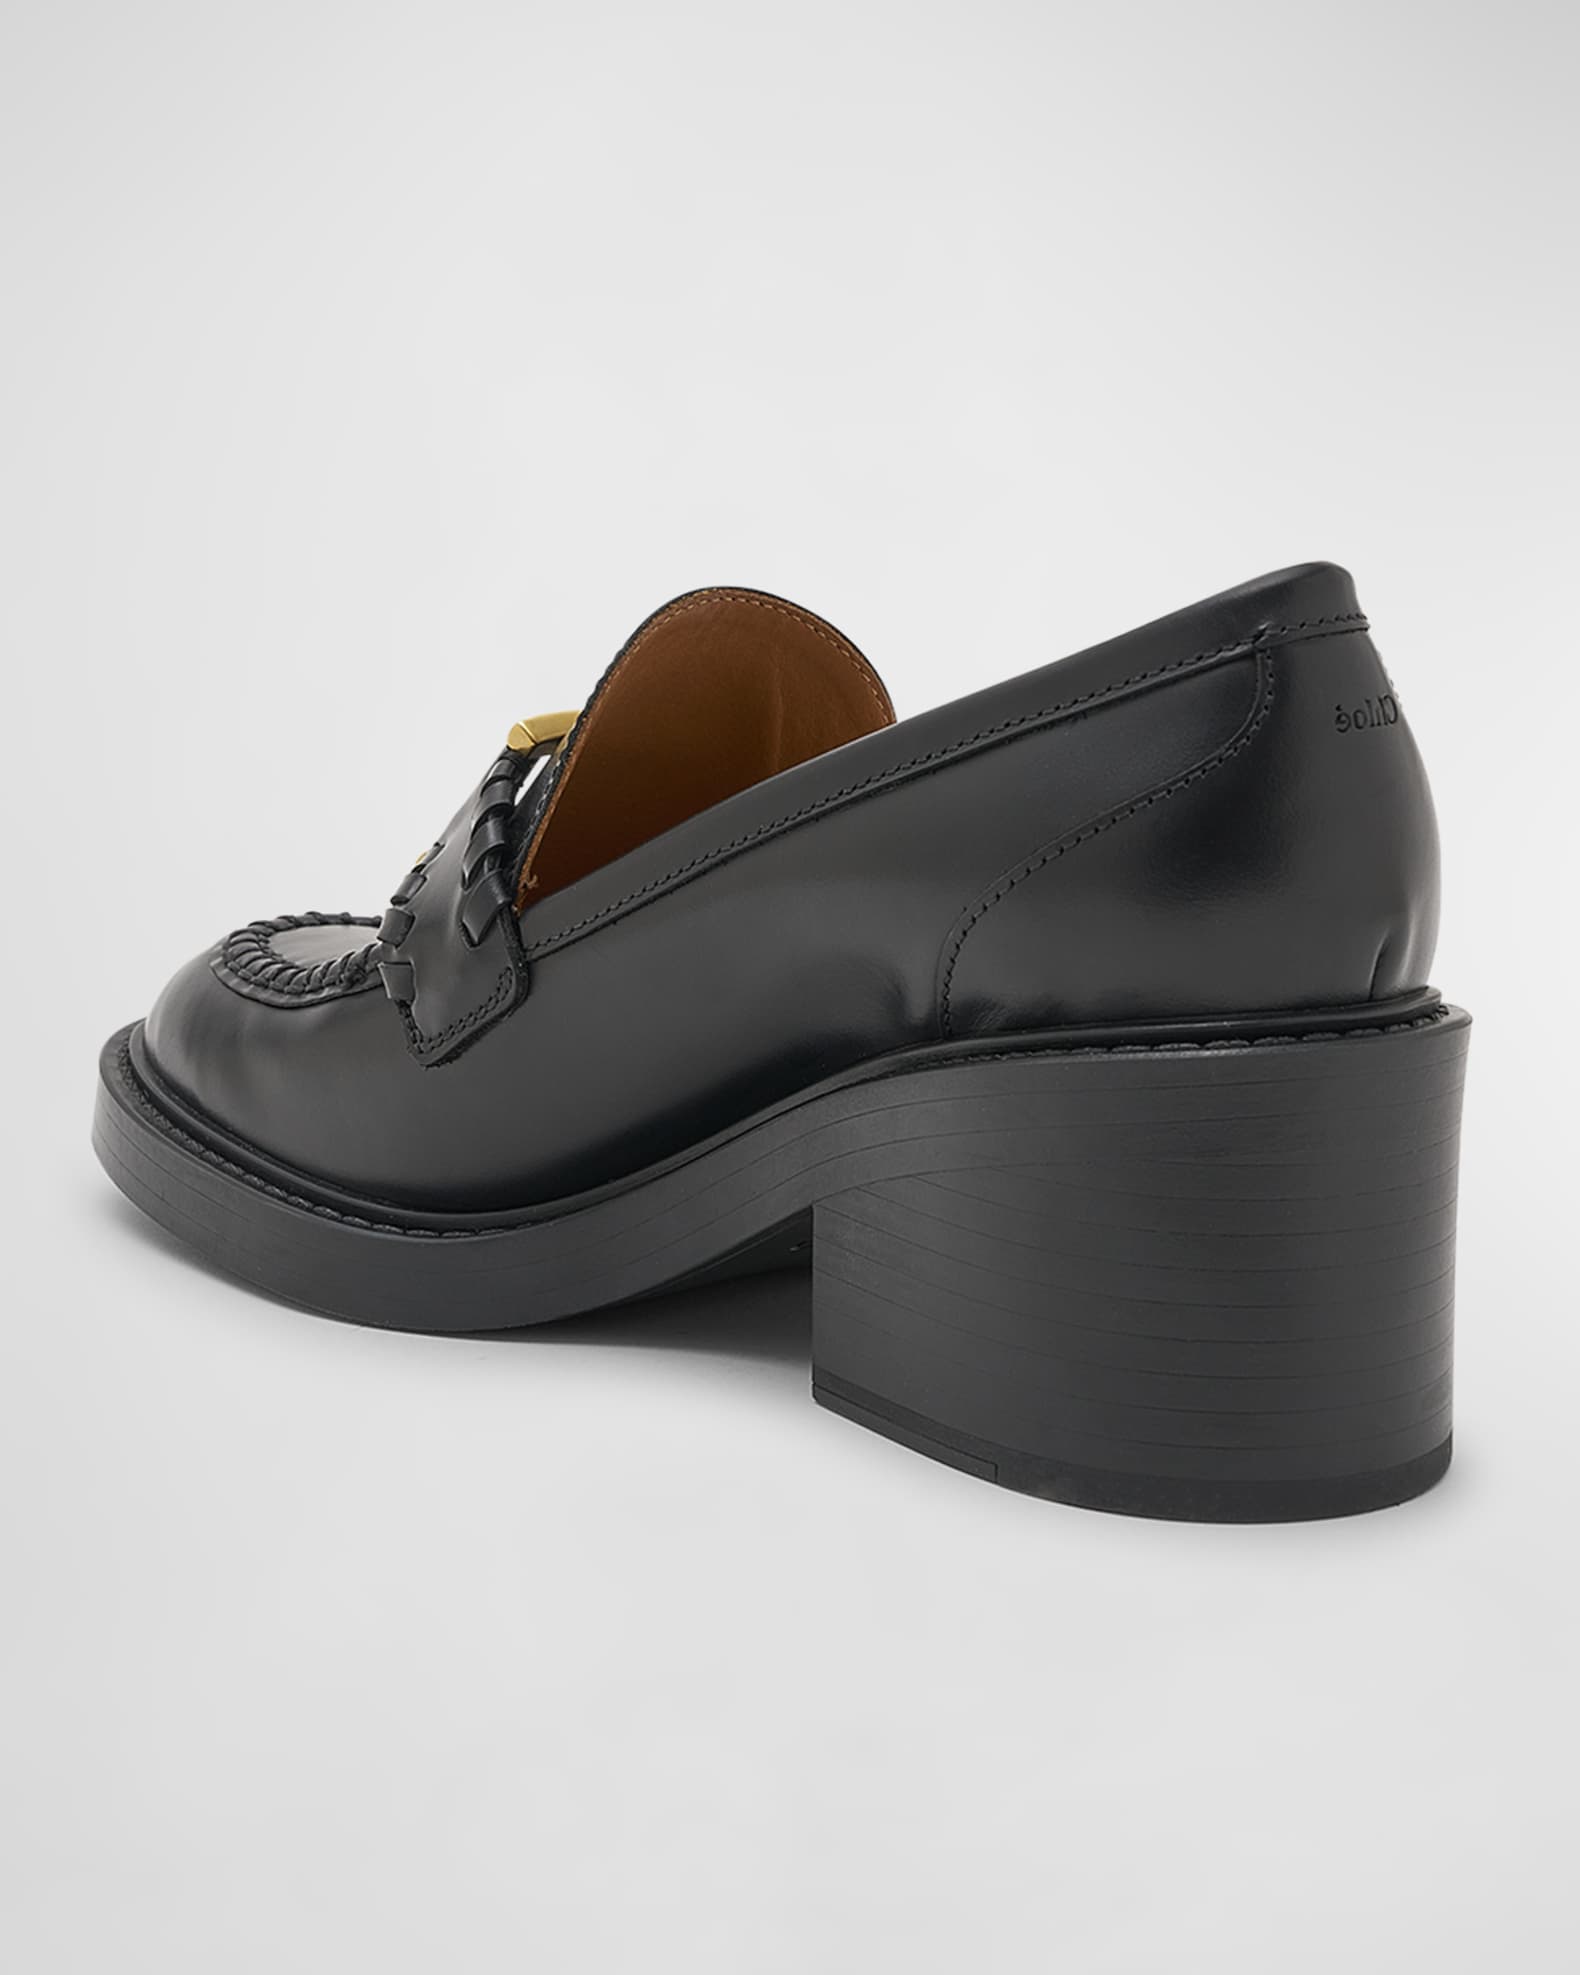 Chloe Marcie Leather Loafers | Neiman Marcus